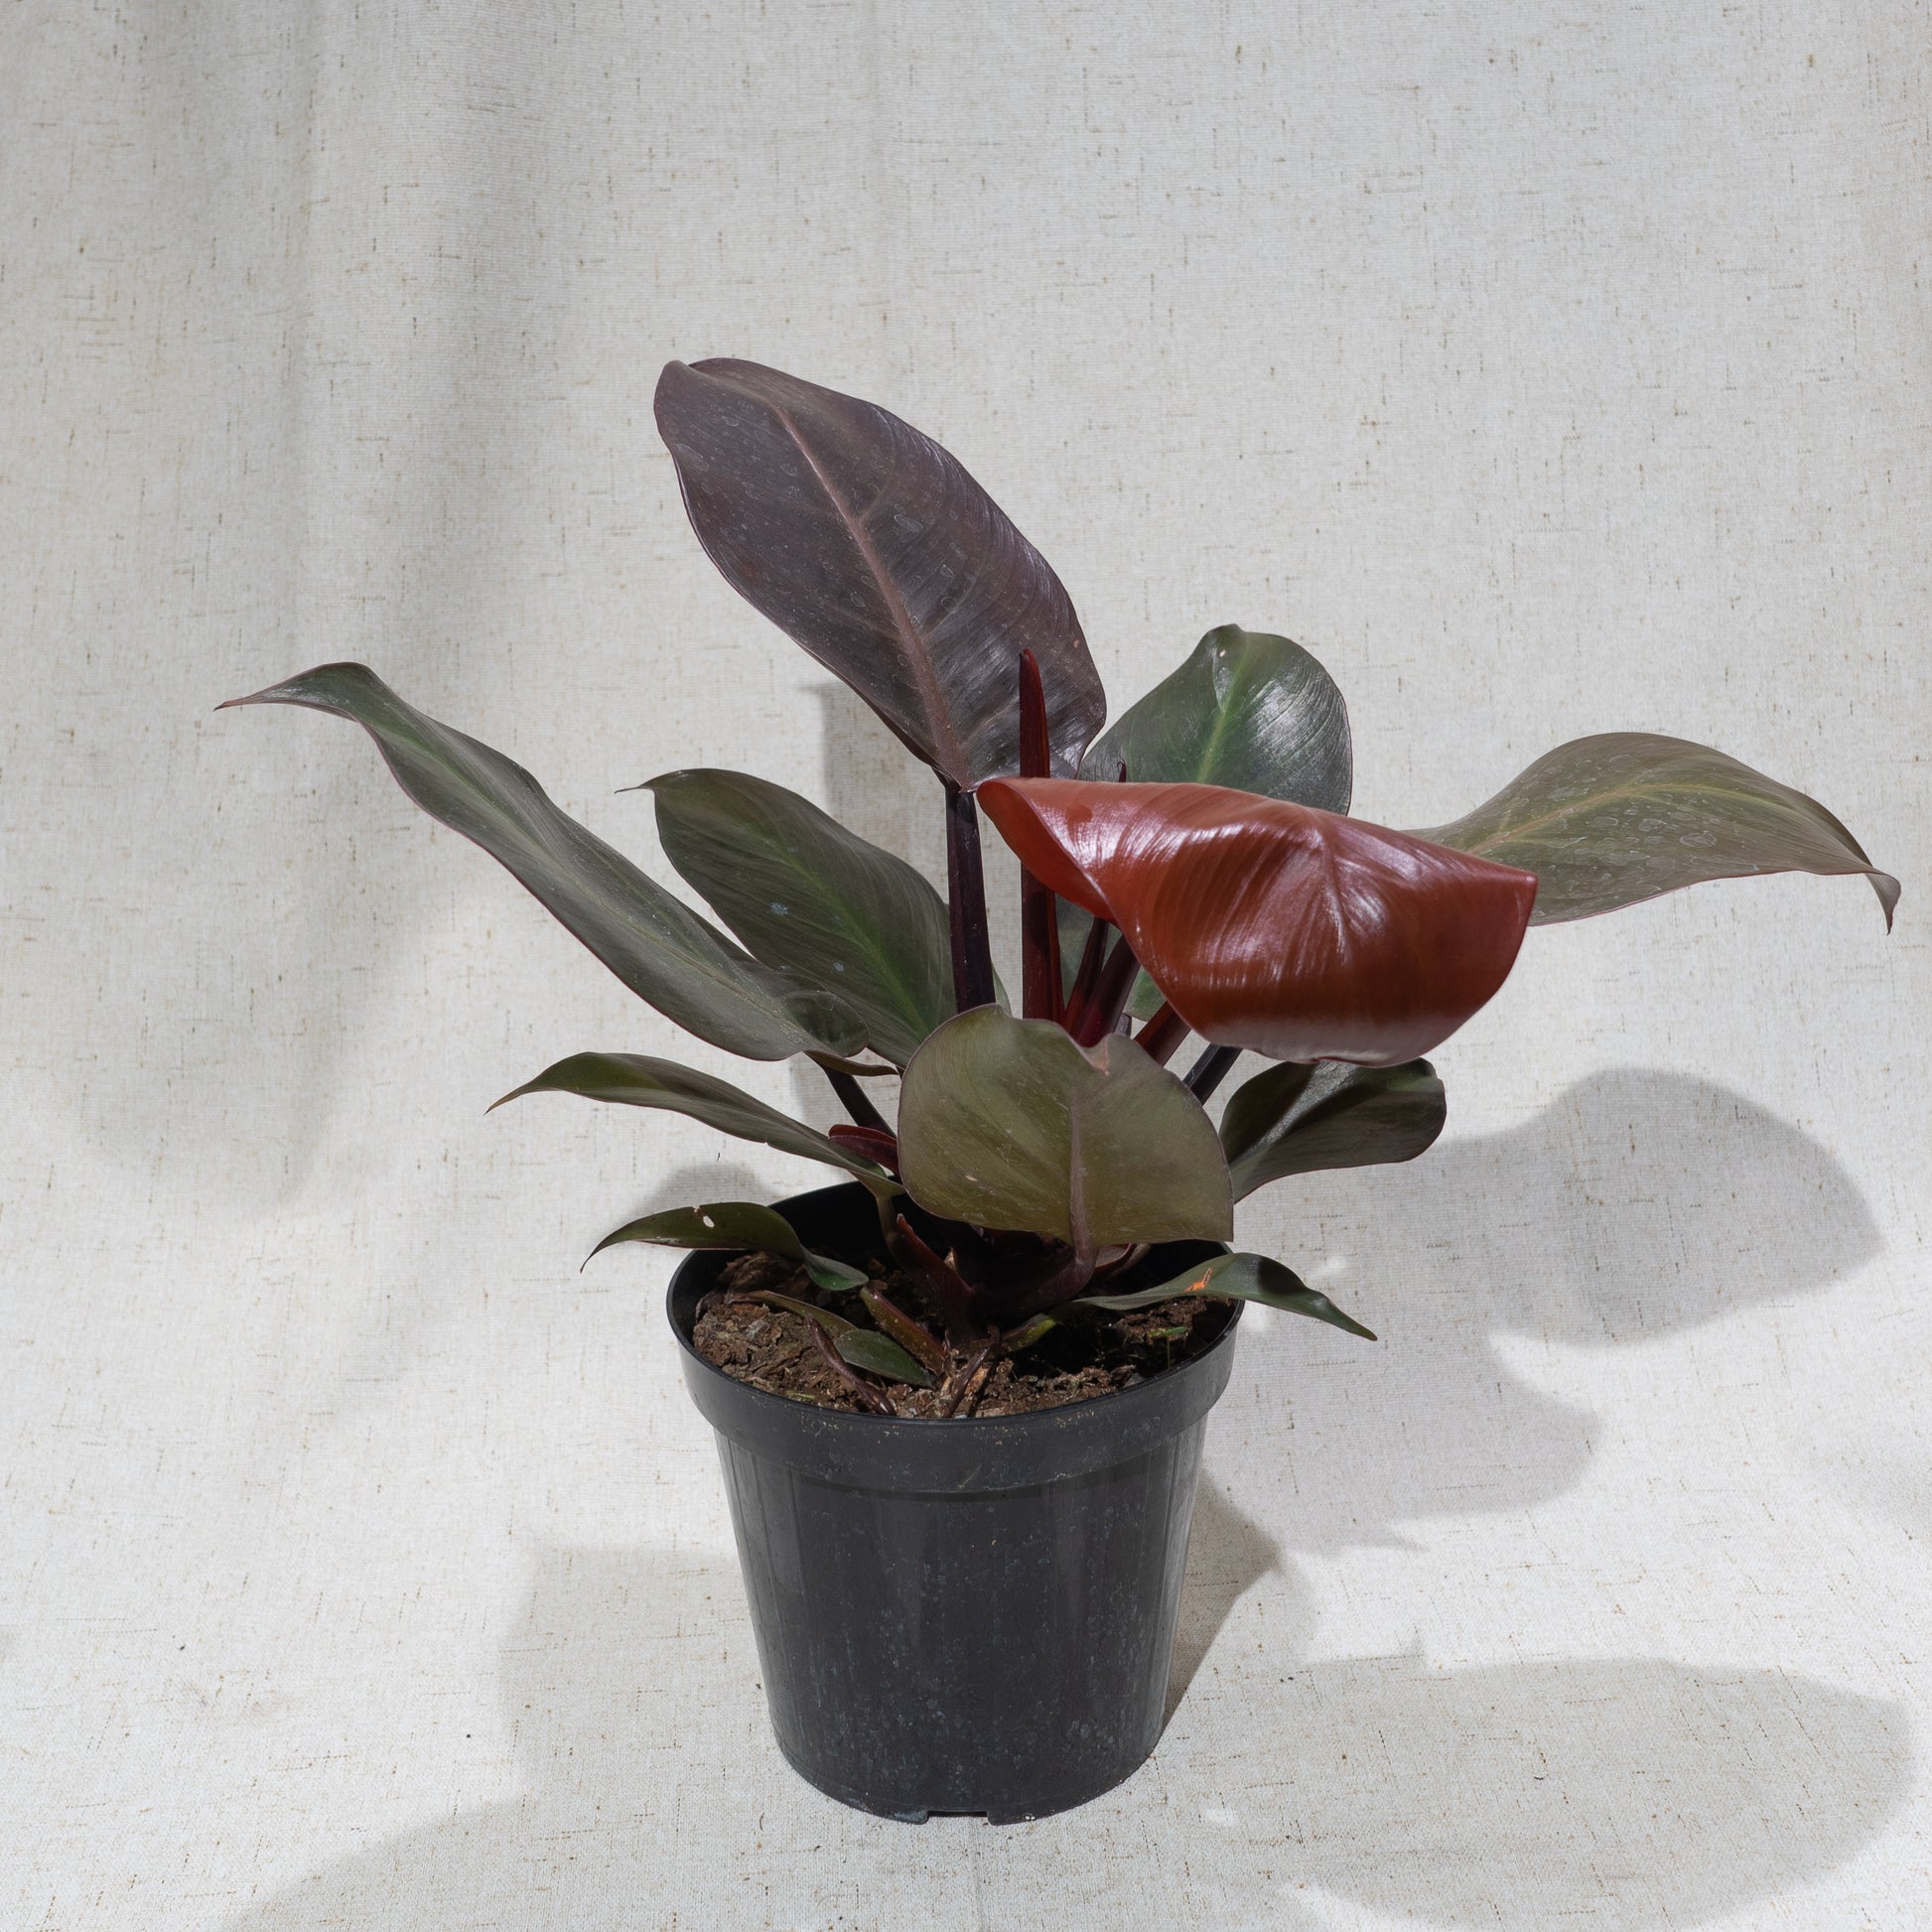 Red Imperial Philo (Philodendron) in a 6 inch pot. Indoor plant for sale by Promise Supply for delivery and pickup in Toronto